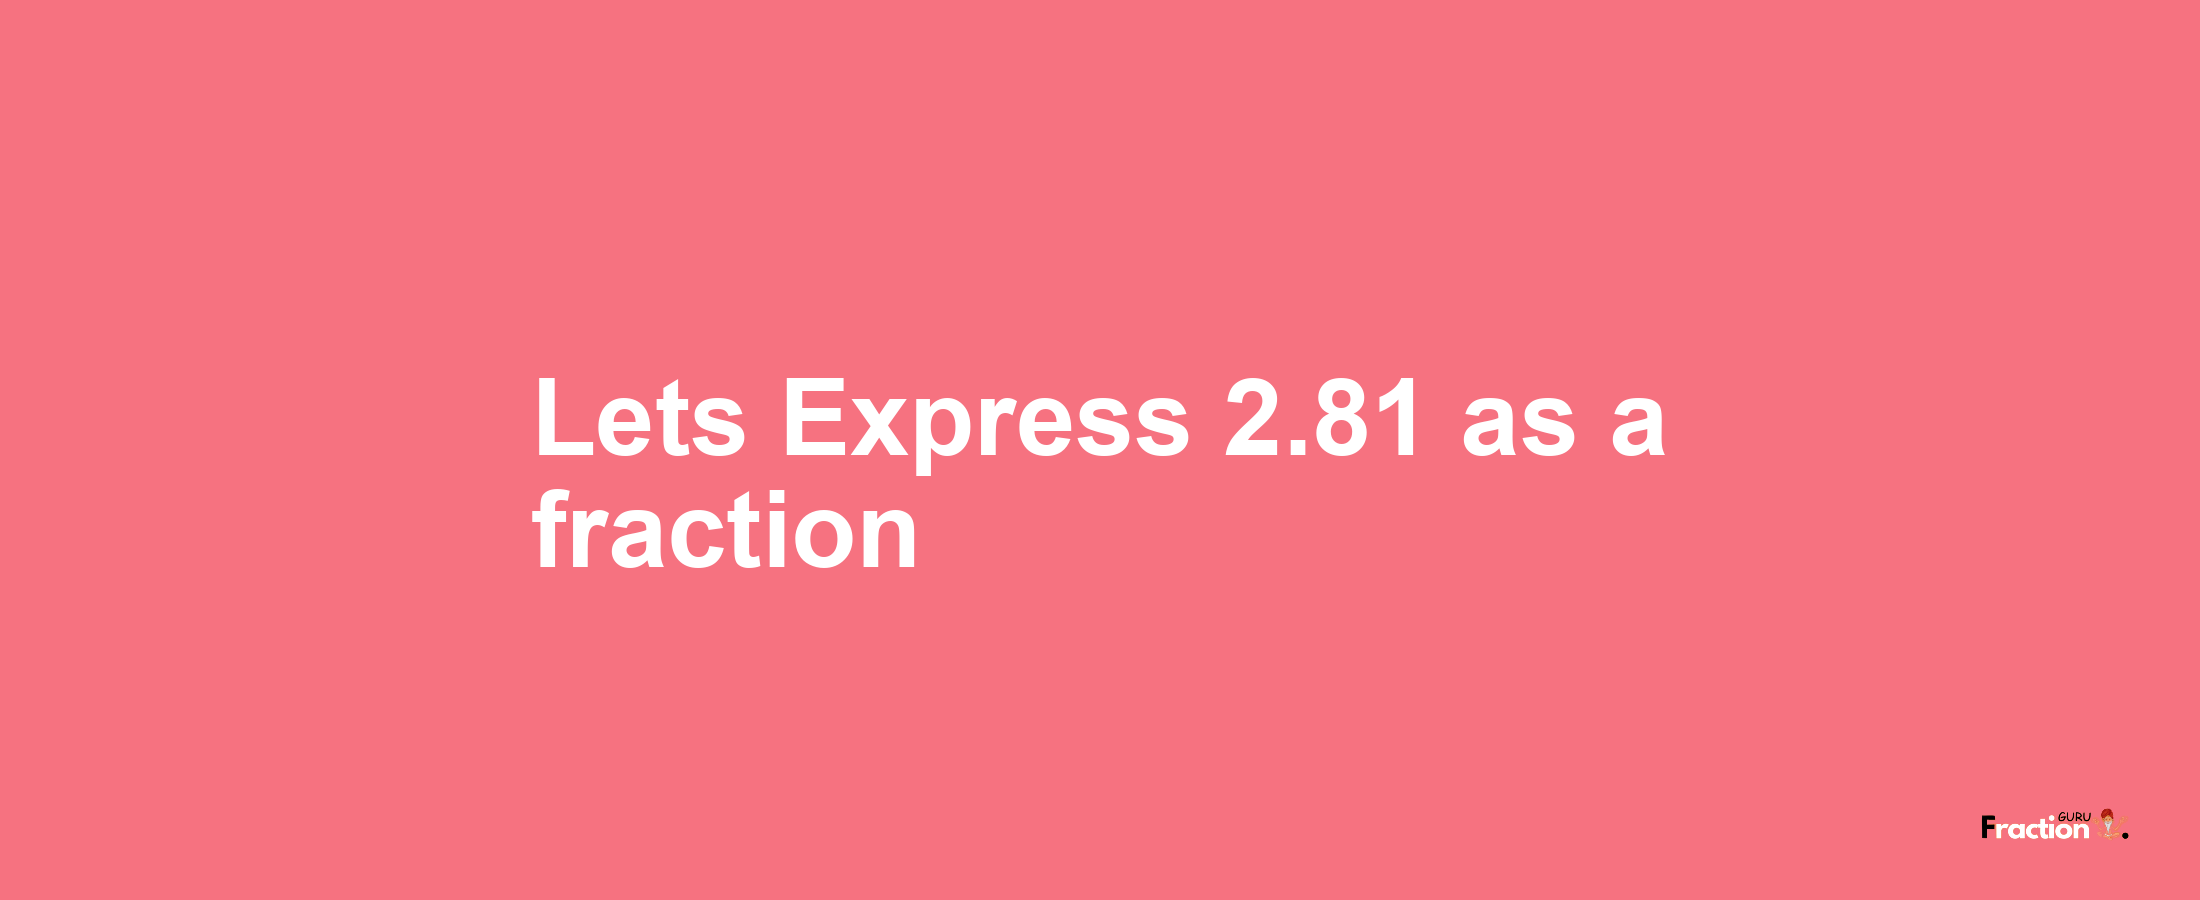 Lets Express 2.81 as afraction